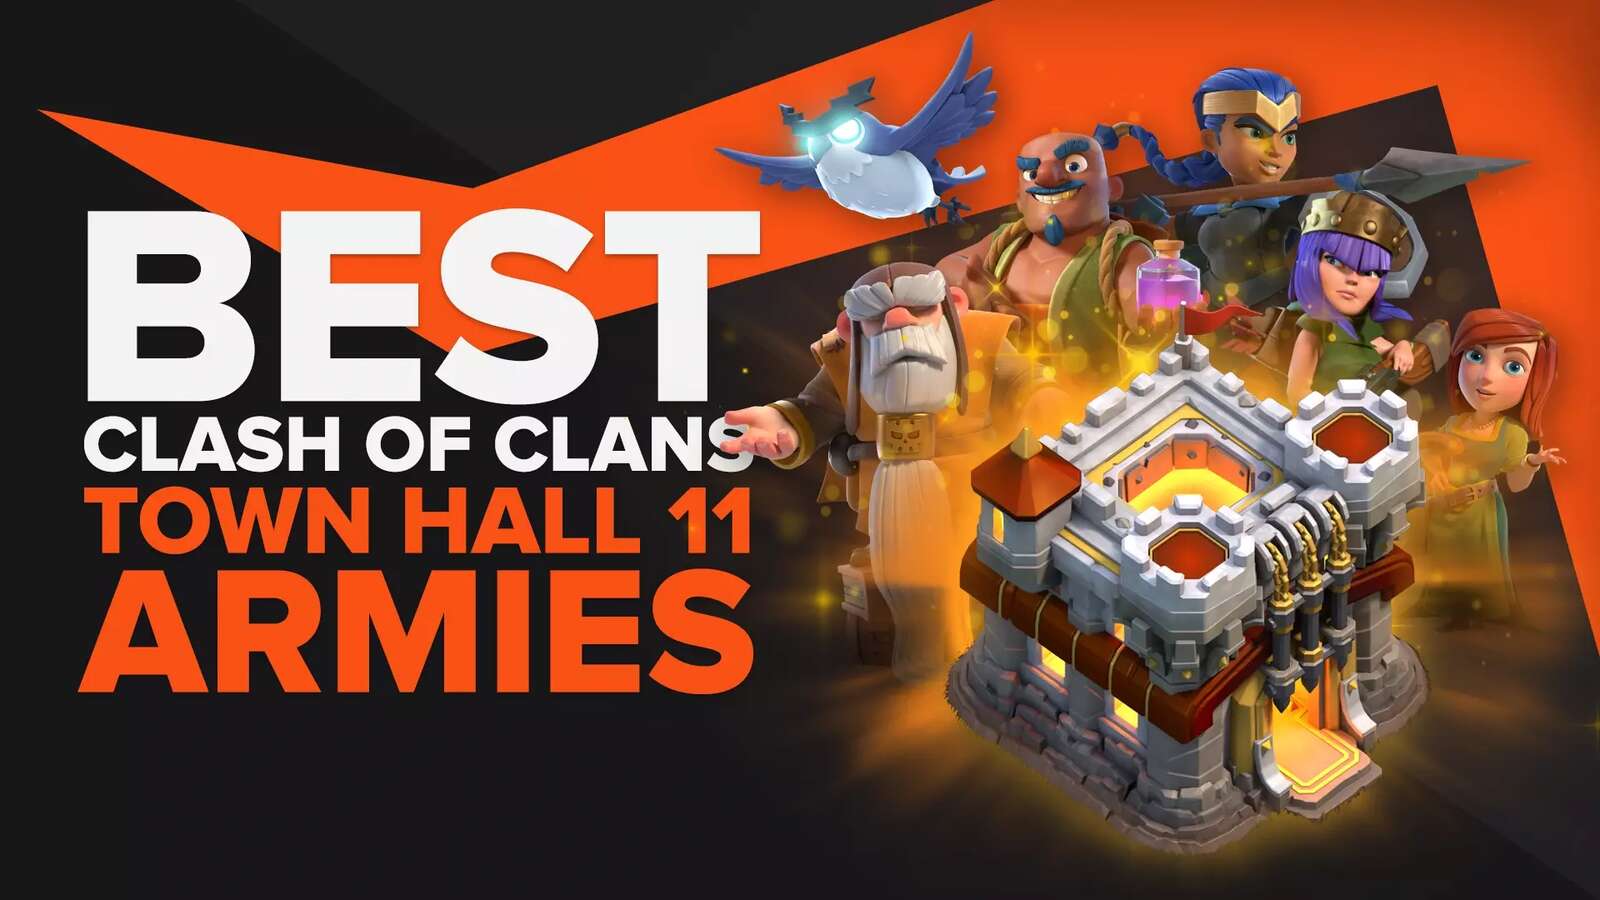 What Is The Best Army In Clash of Clans For Town Hall 11